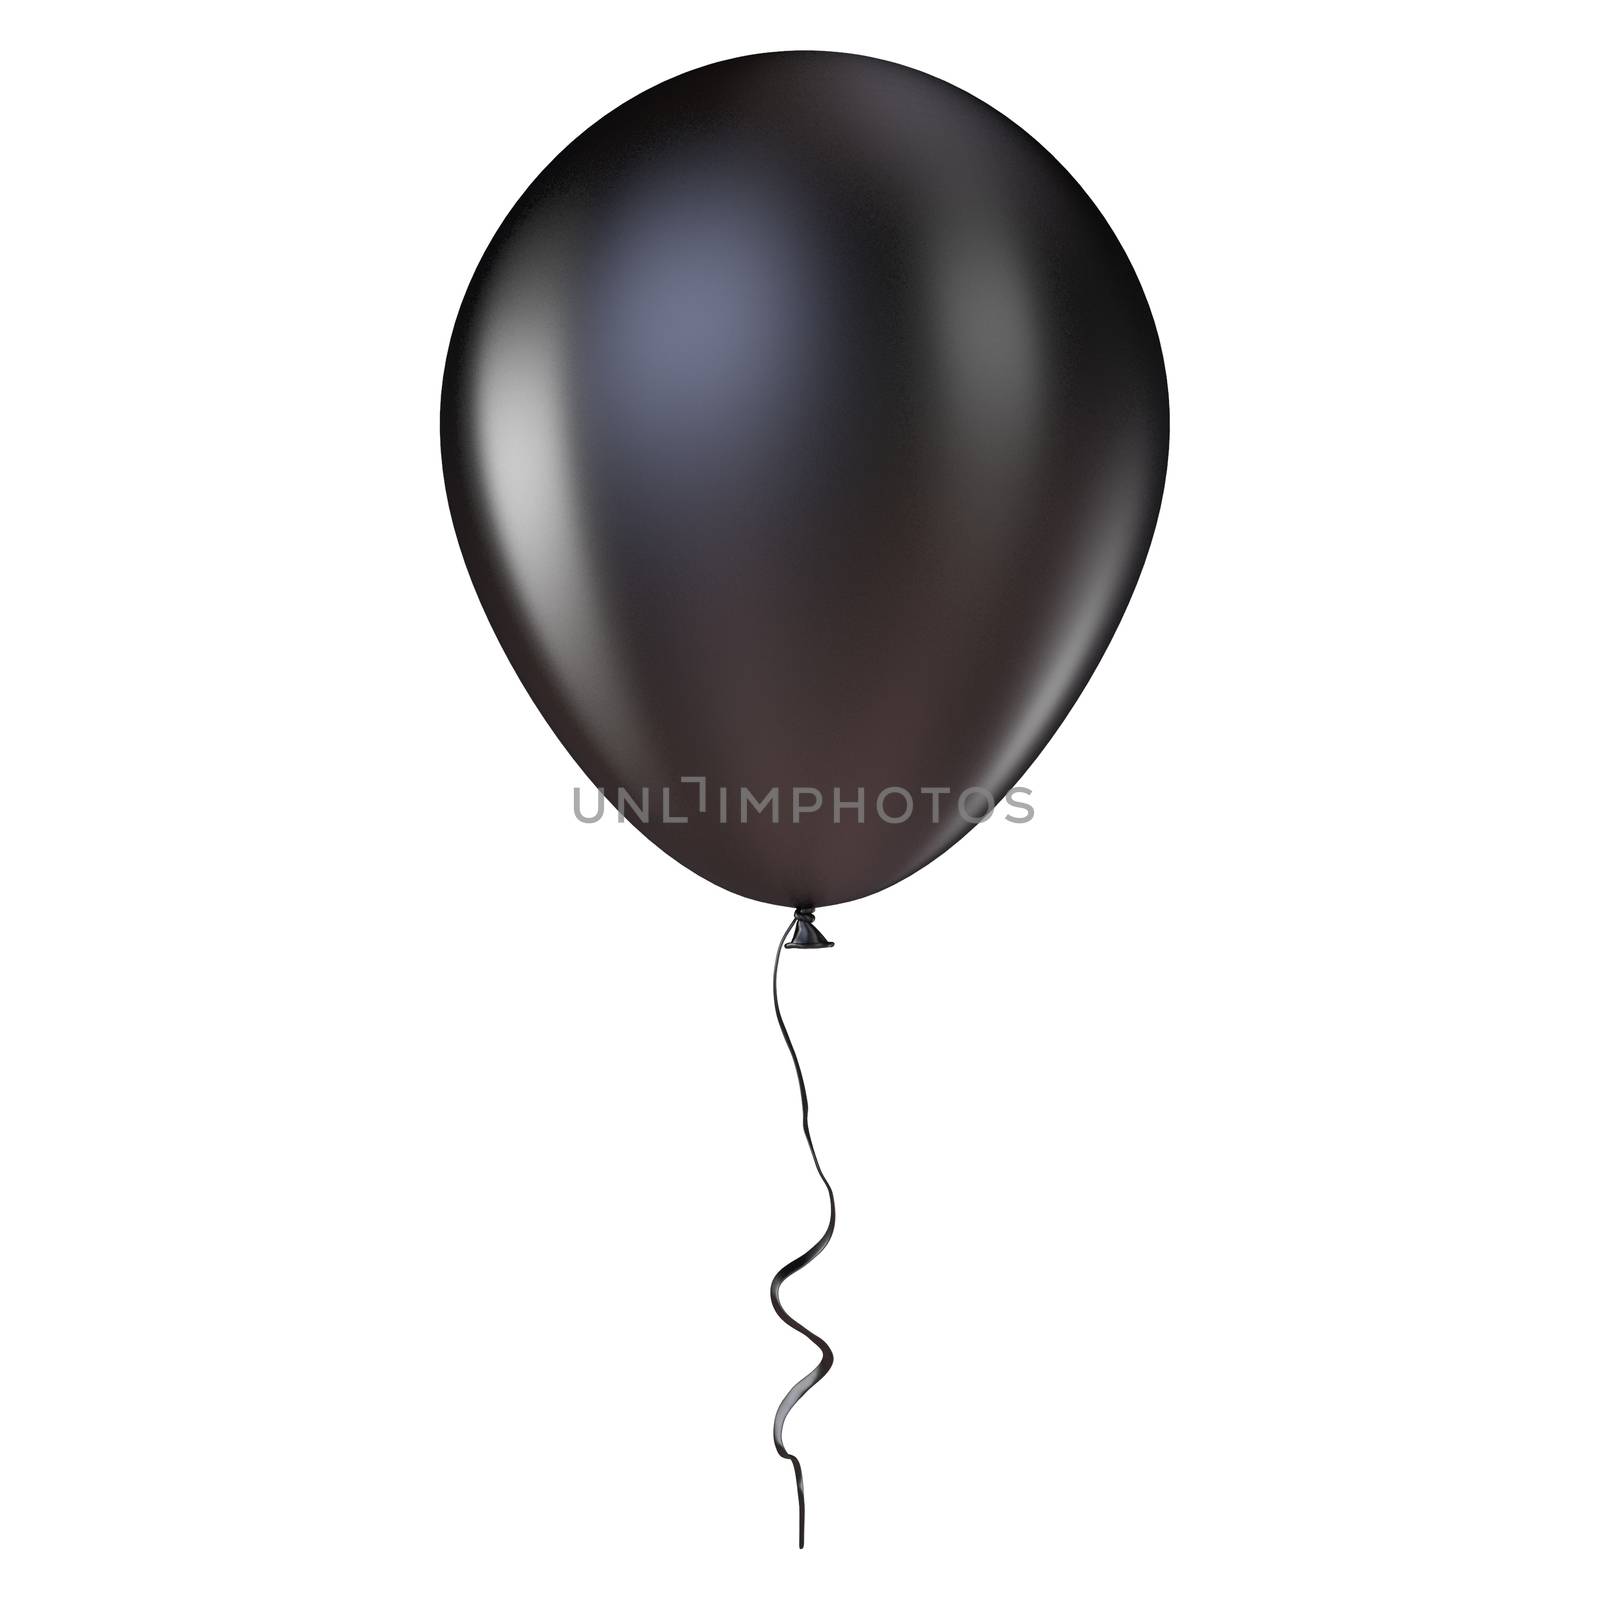 Black helium balloon with ribbon. 3D render illustration isolated on white background